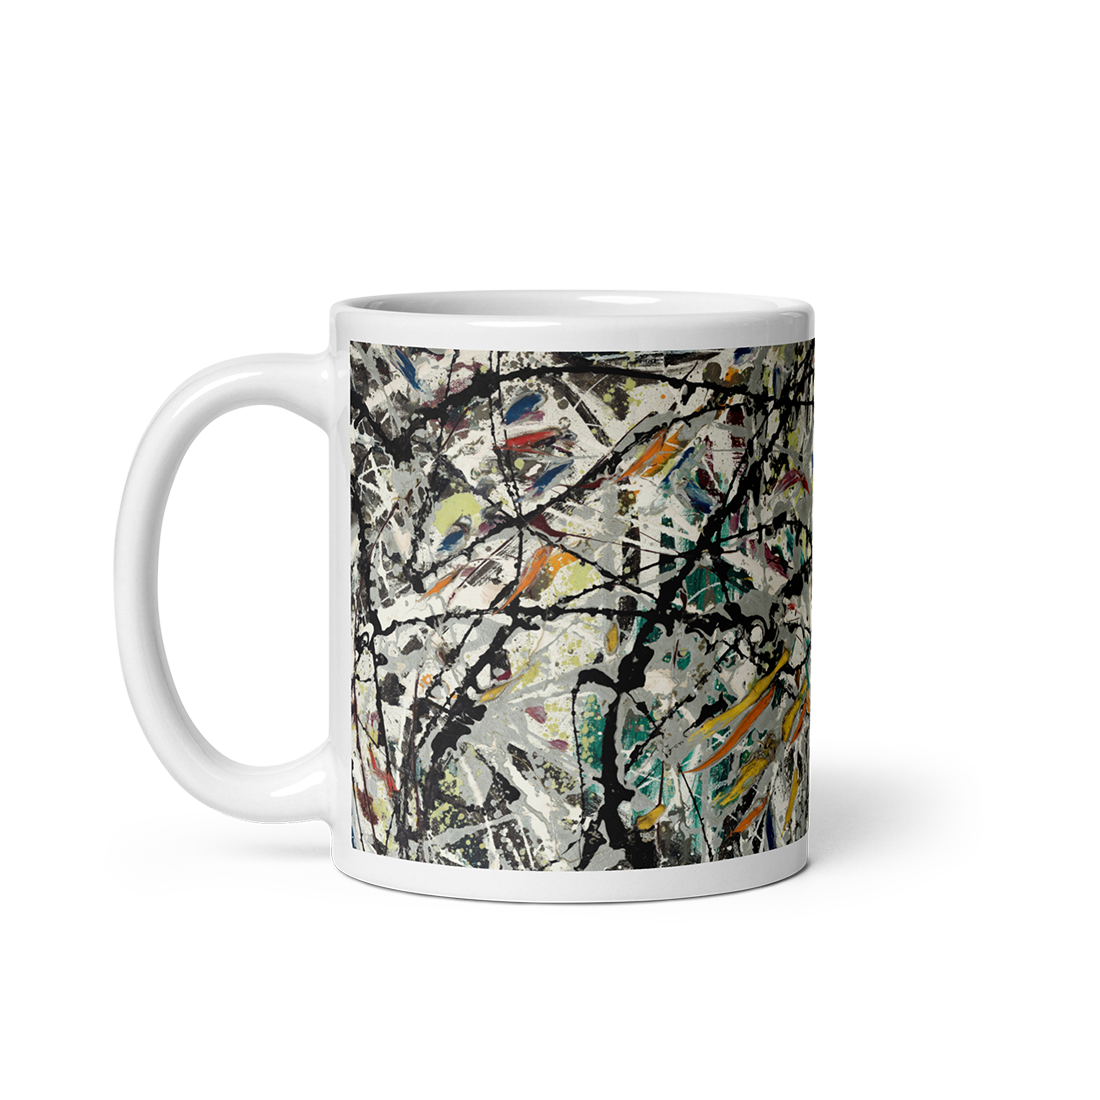 Primary image for Pollock - Watery Paths 1947 Artwork Mug